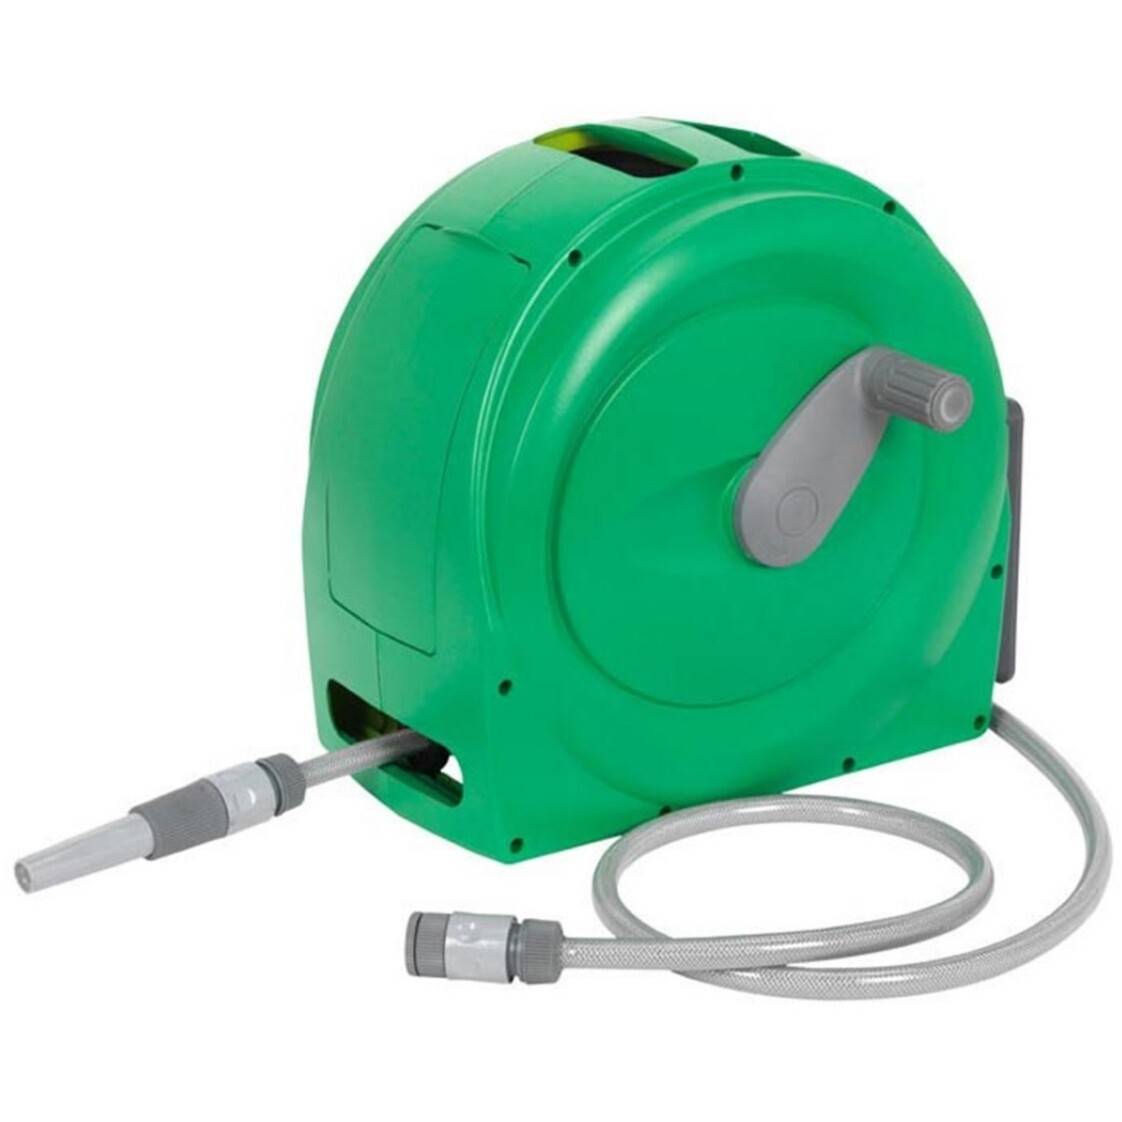 Sealey WR92 Water Hose Reel 20 Mtr from Lawson HIS